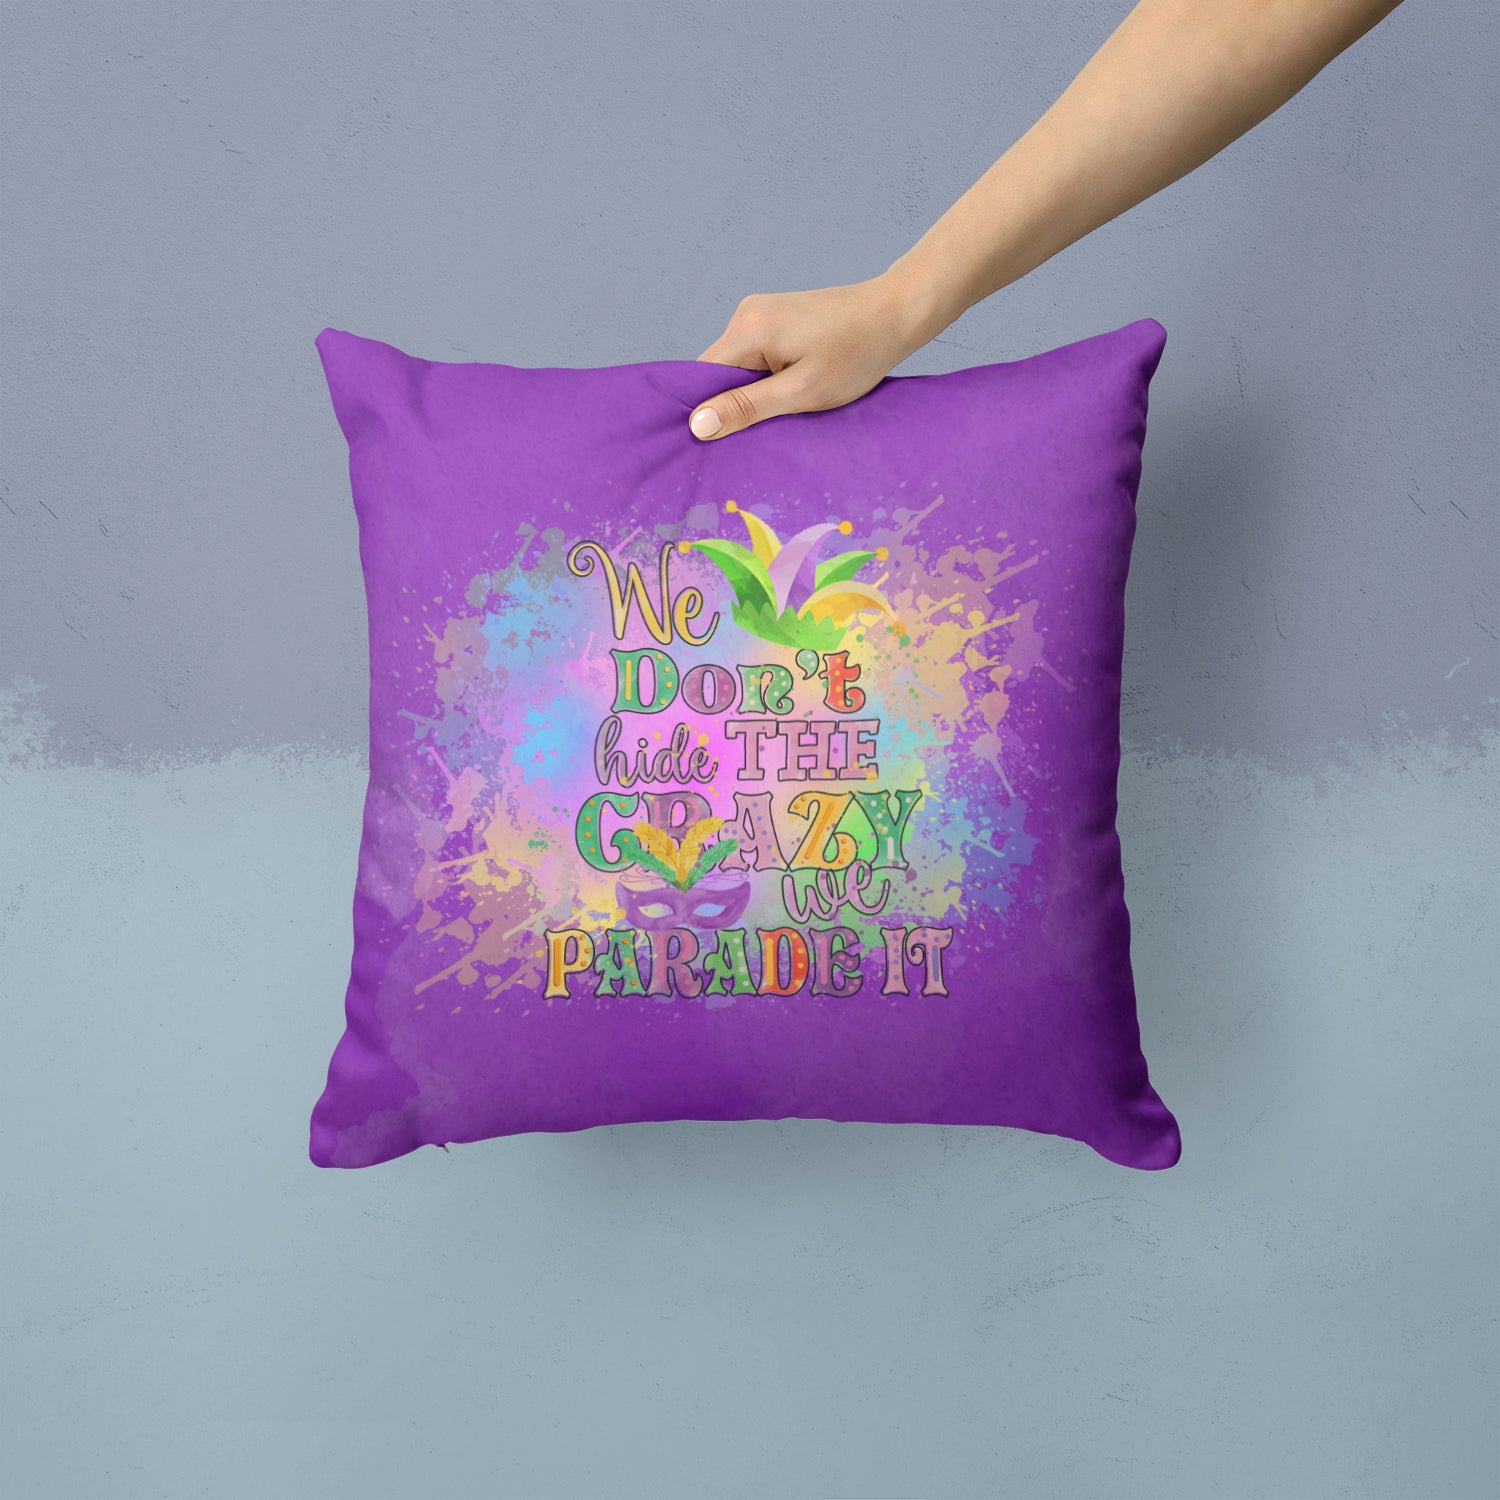 Buy this We Don't Hide the Crazy Mardi Gras Fabric Decorative Pillow